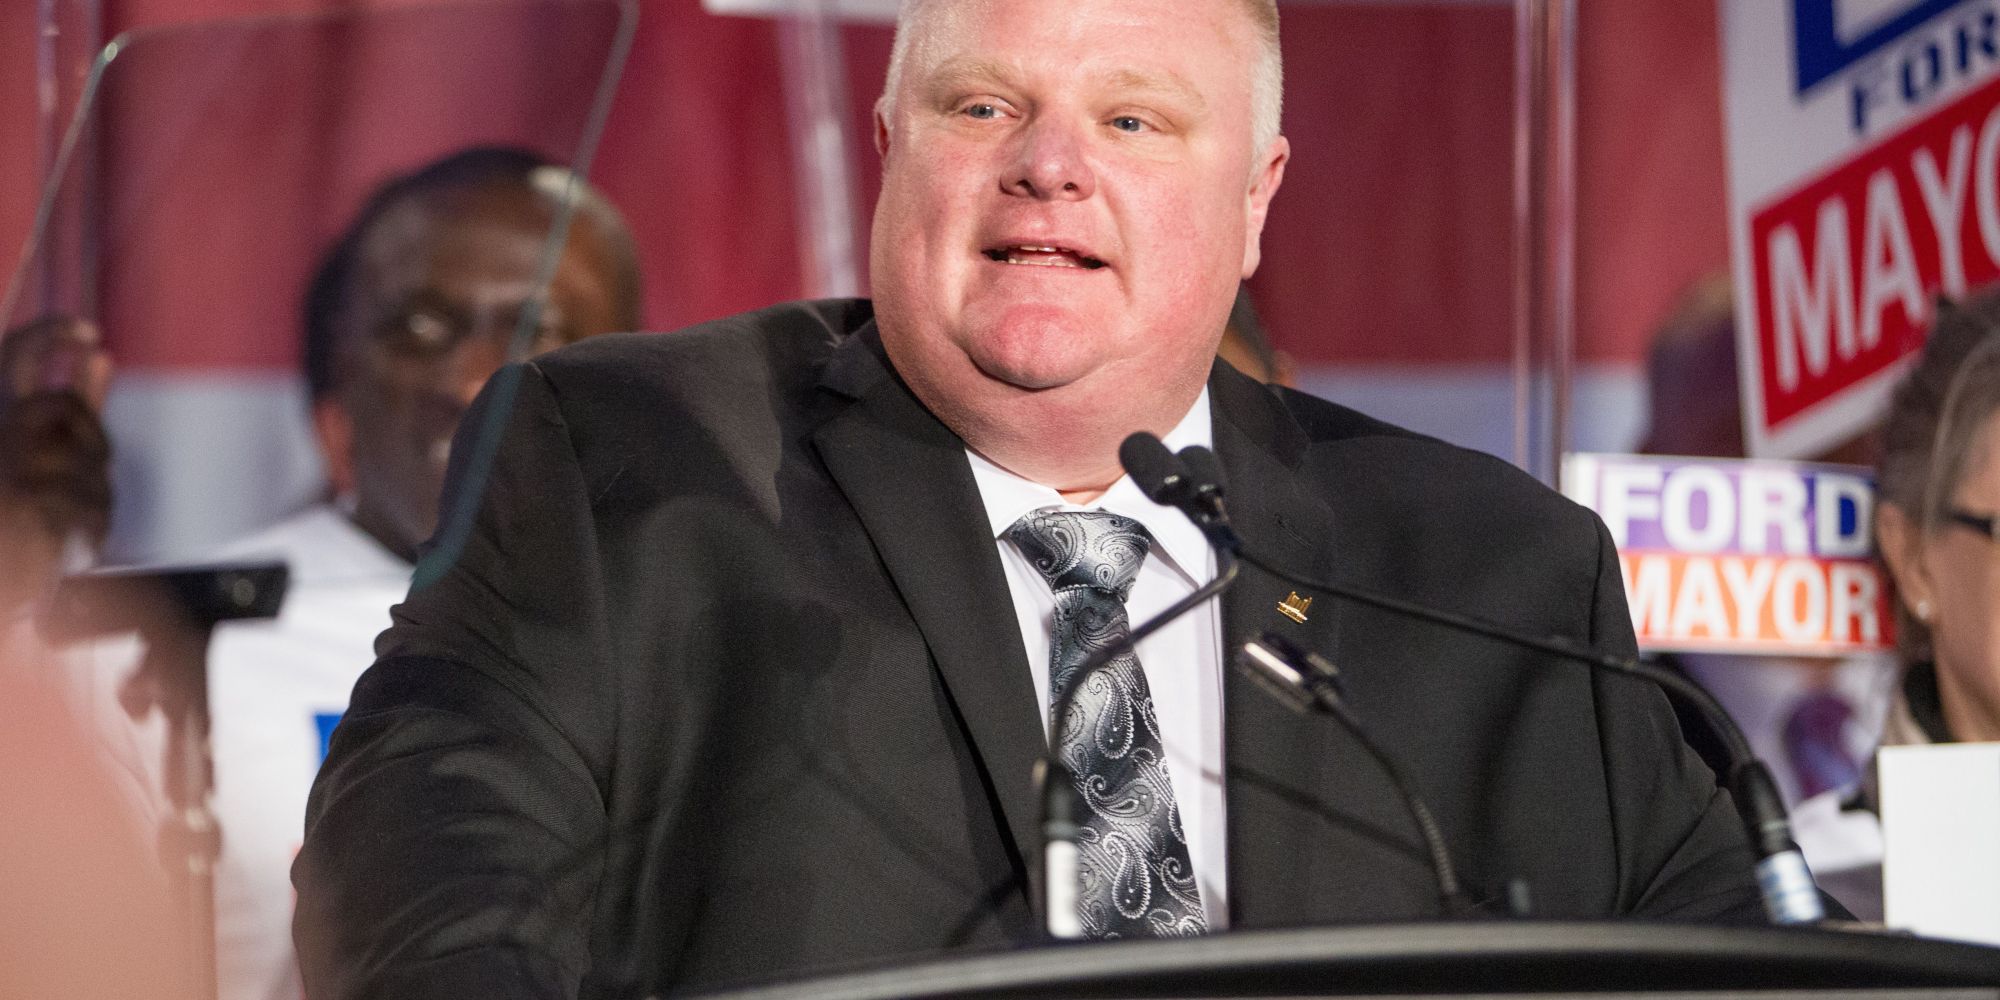 Rob ford stay granted #4